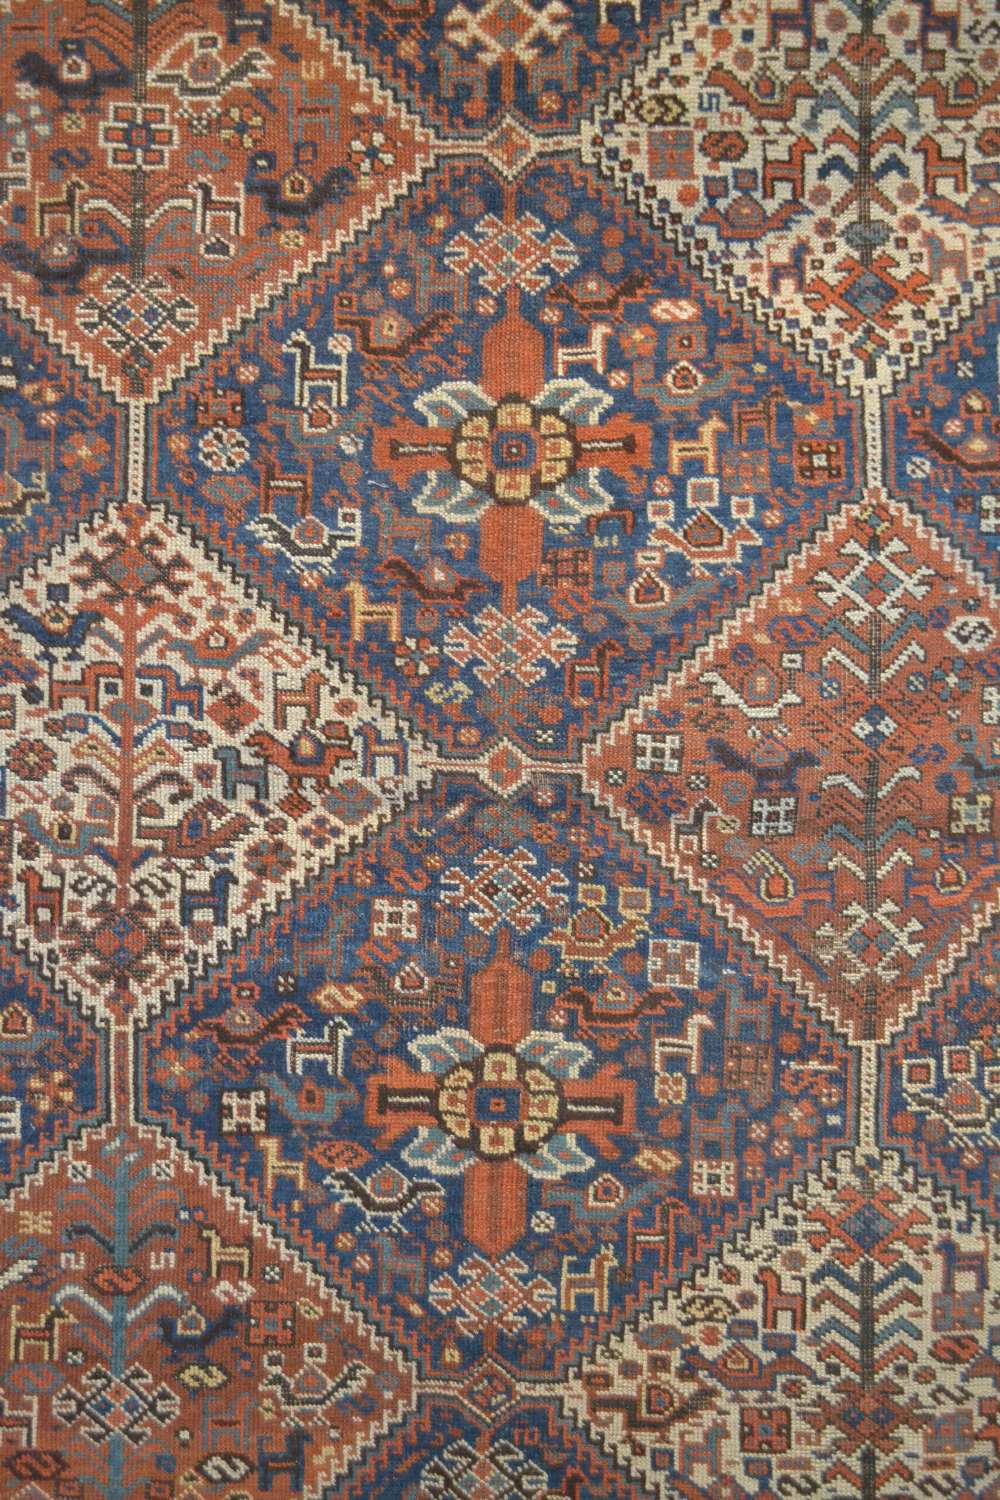 Khamseh rug, Fars, south west Persia, late 19th/early 20th century, 6ft. 6in. x 5ft. 2in. 1.98m. x - Image 3 of 6